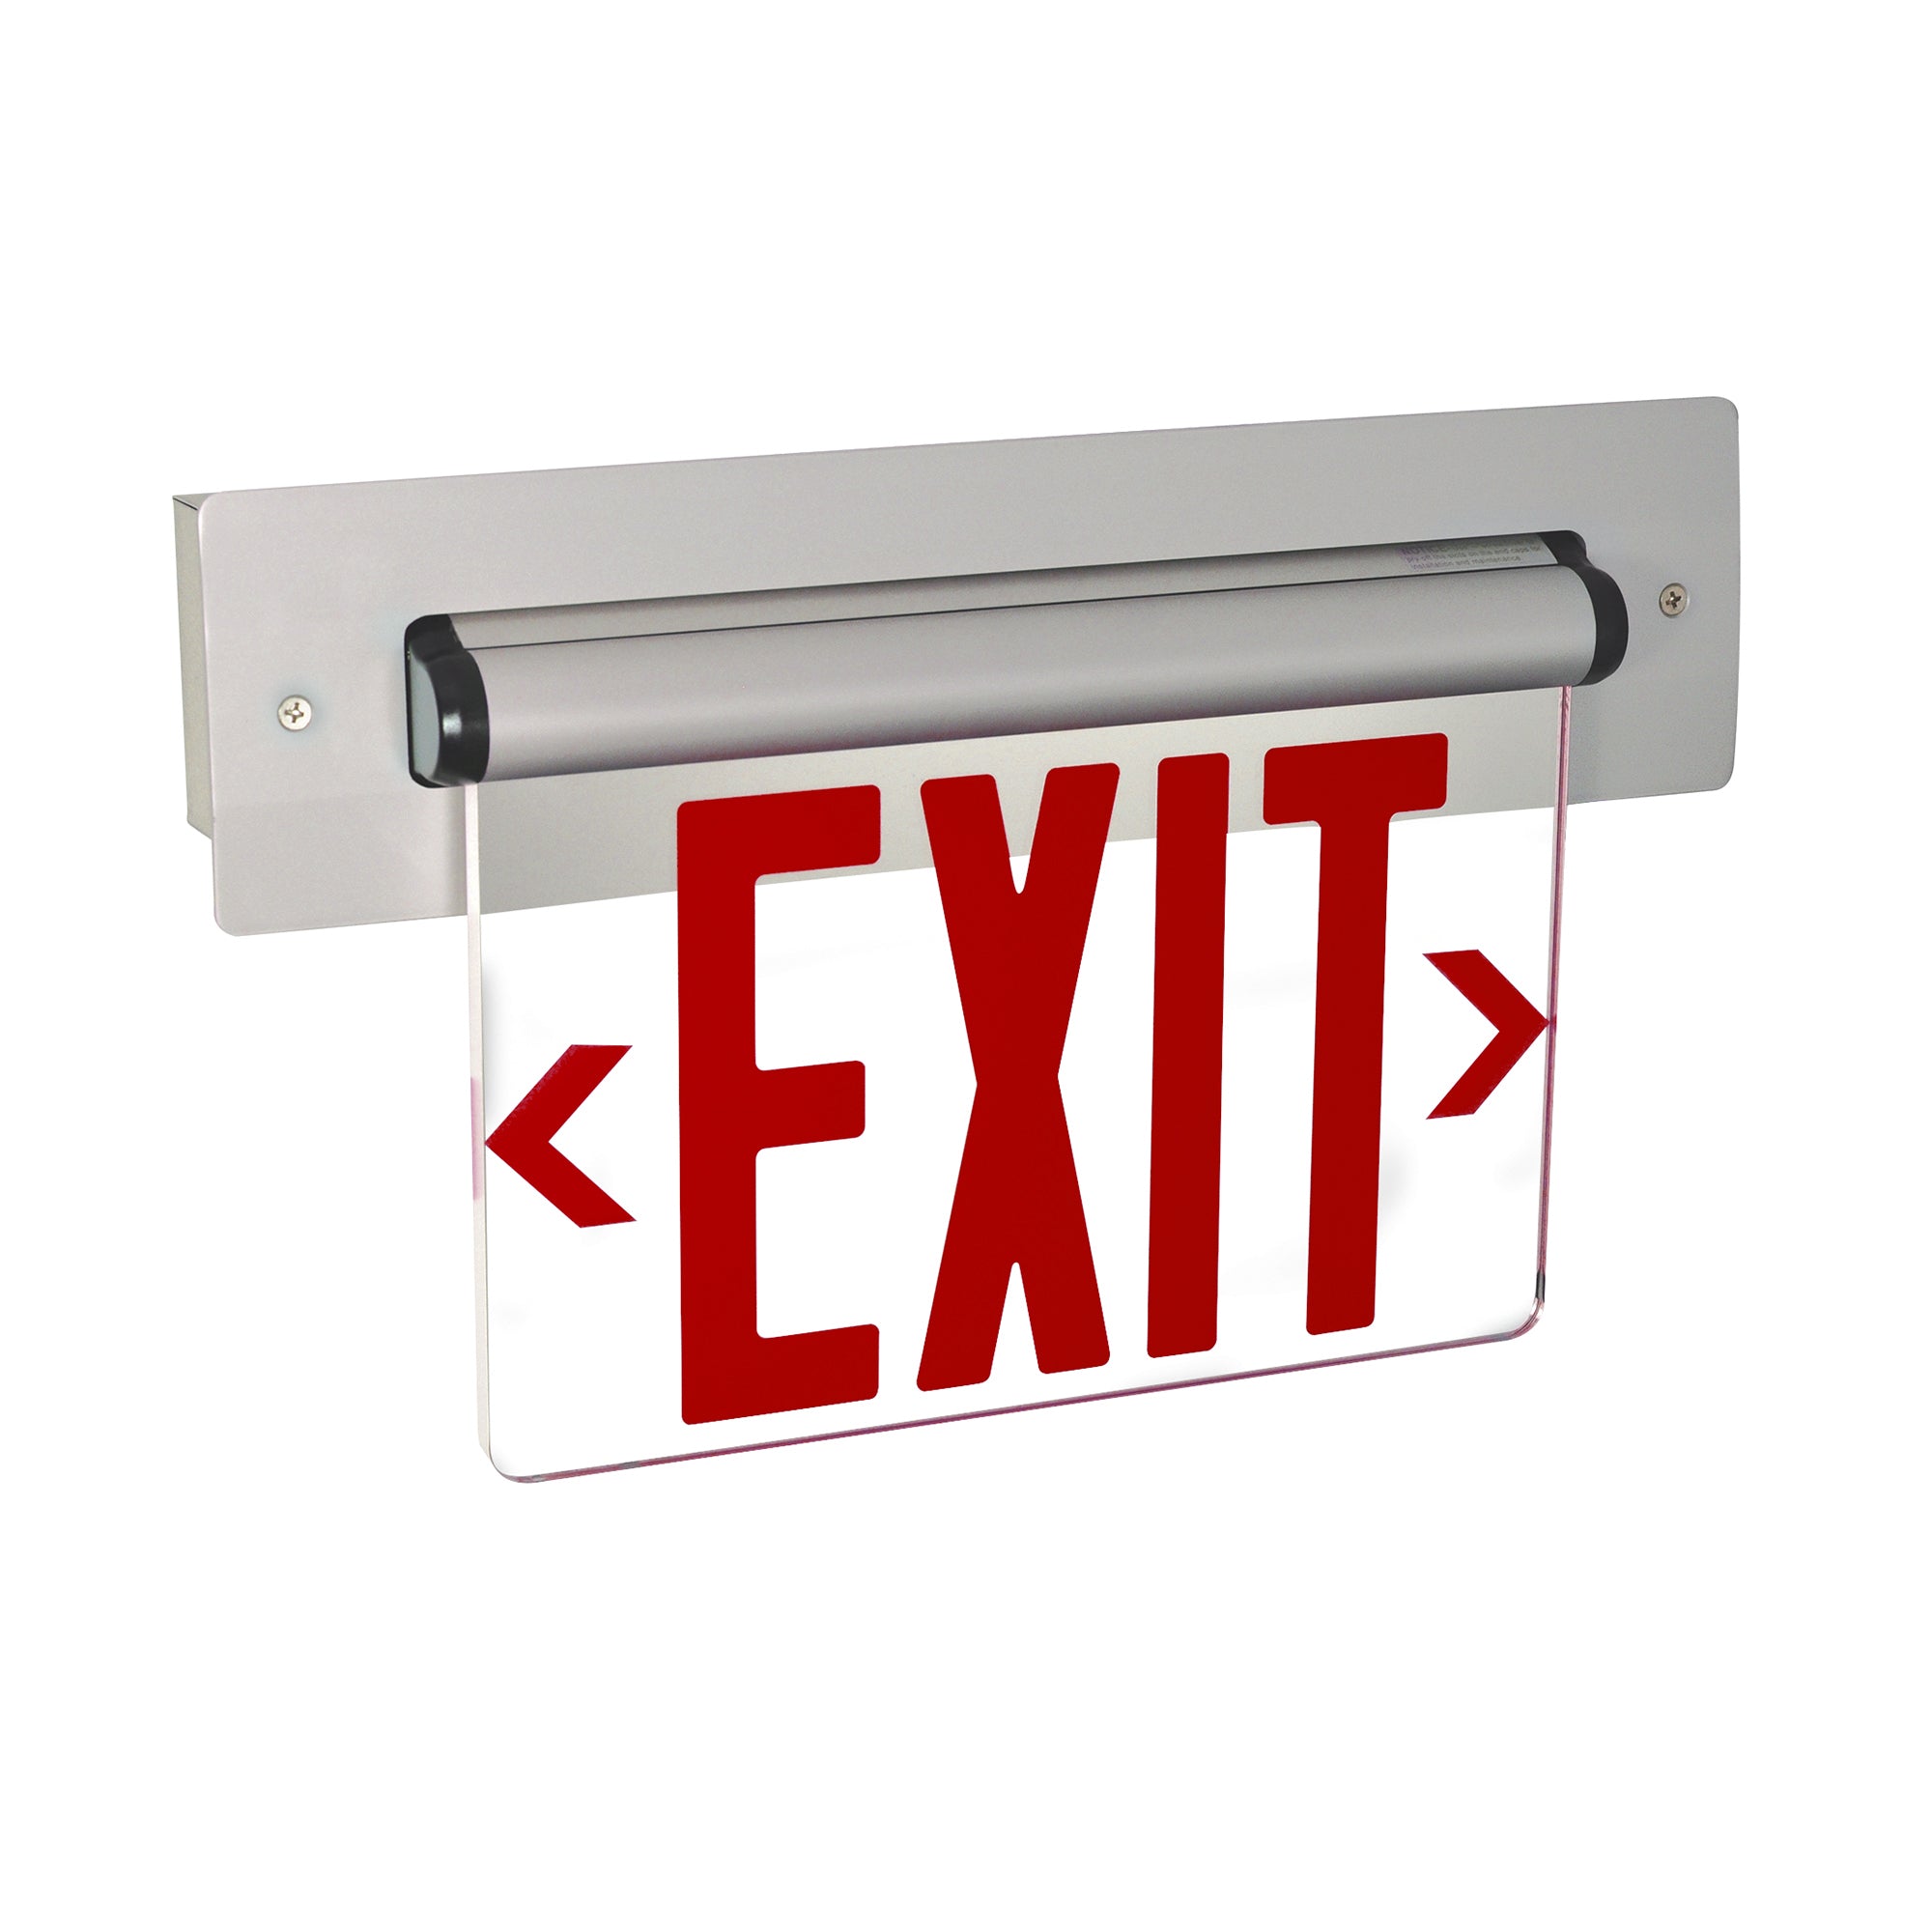 Nora Lighting NX-813-LEDRCW - Exit / Emergency - Recessed Adjustable LED Edge-Lit Exit Sign, AC Only, 6 Inch Red Letters, Single Face / Clear Acrylic, White Housing